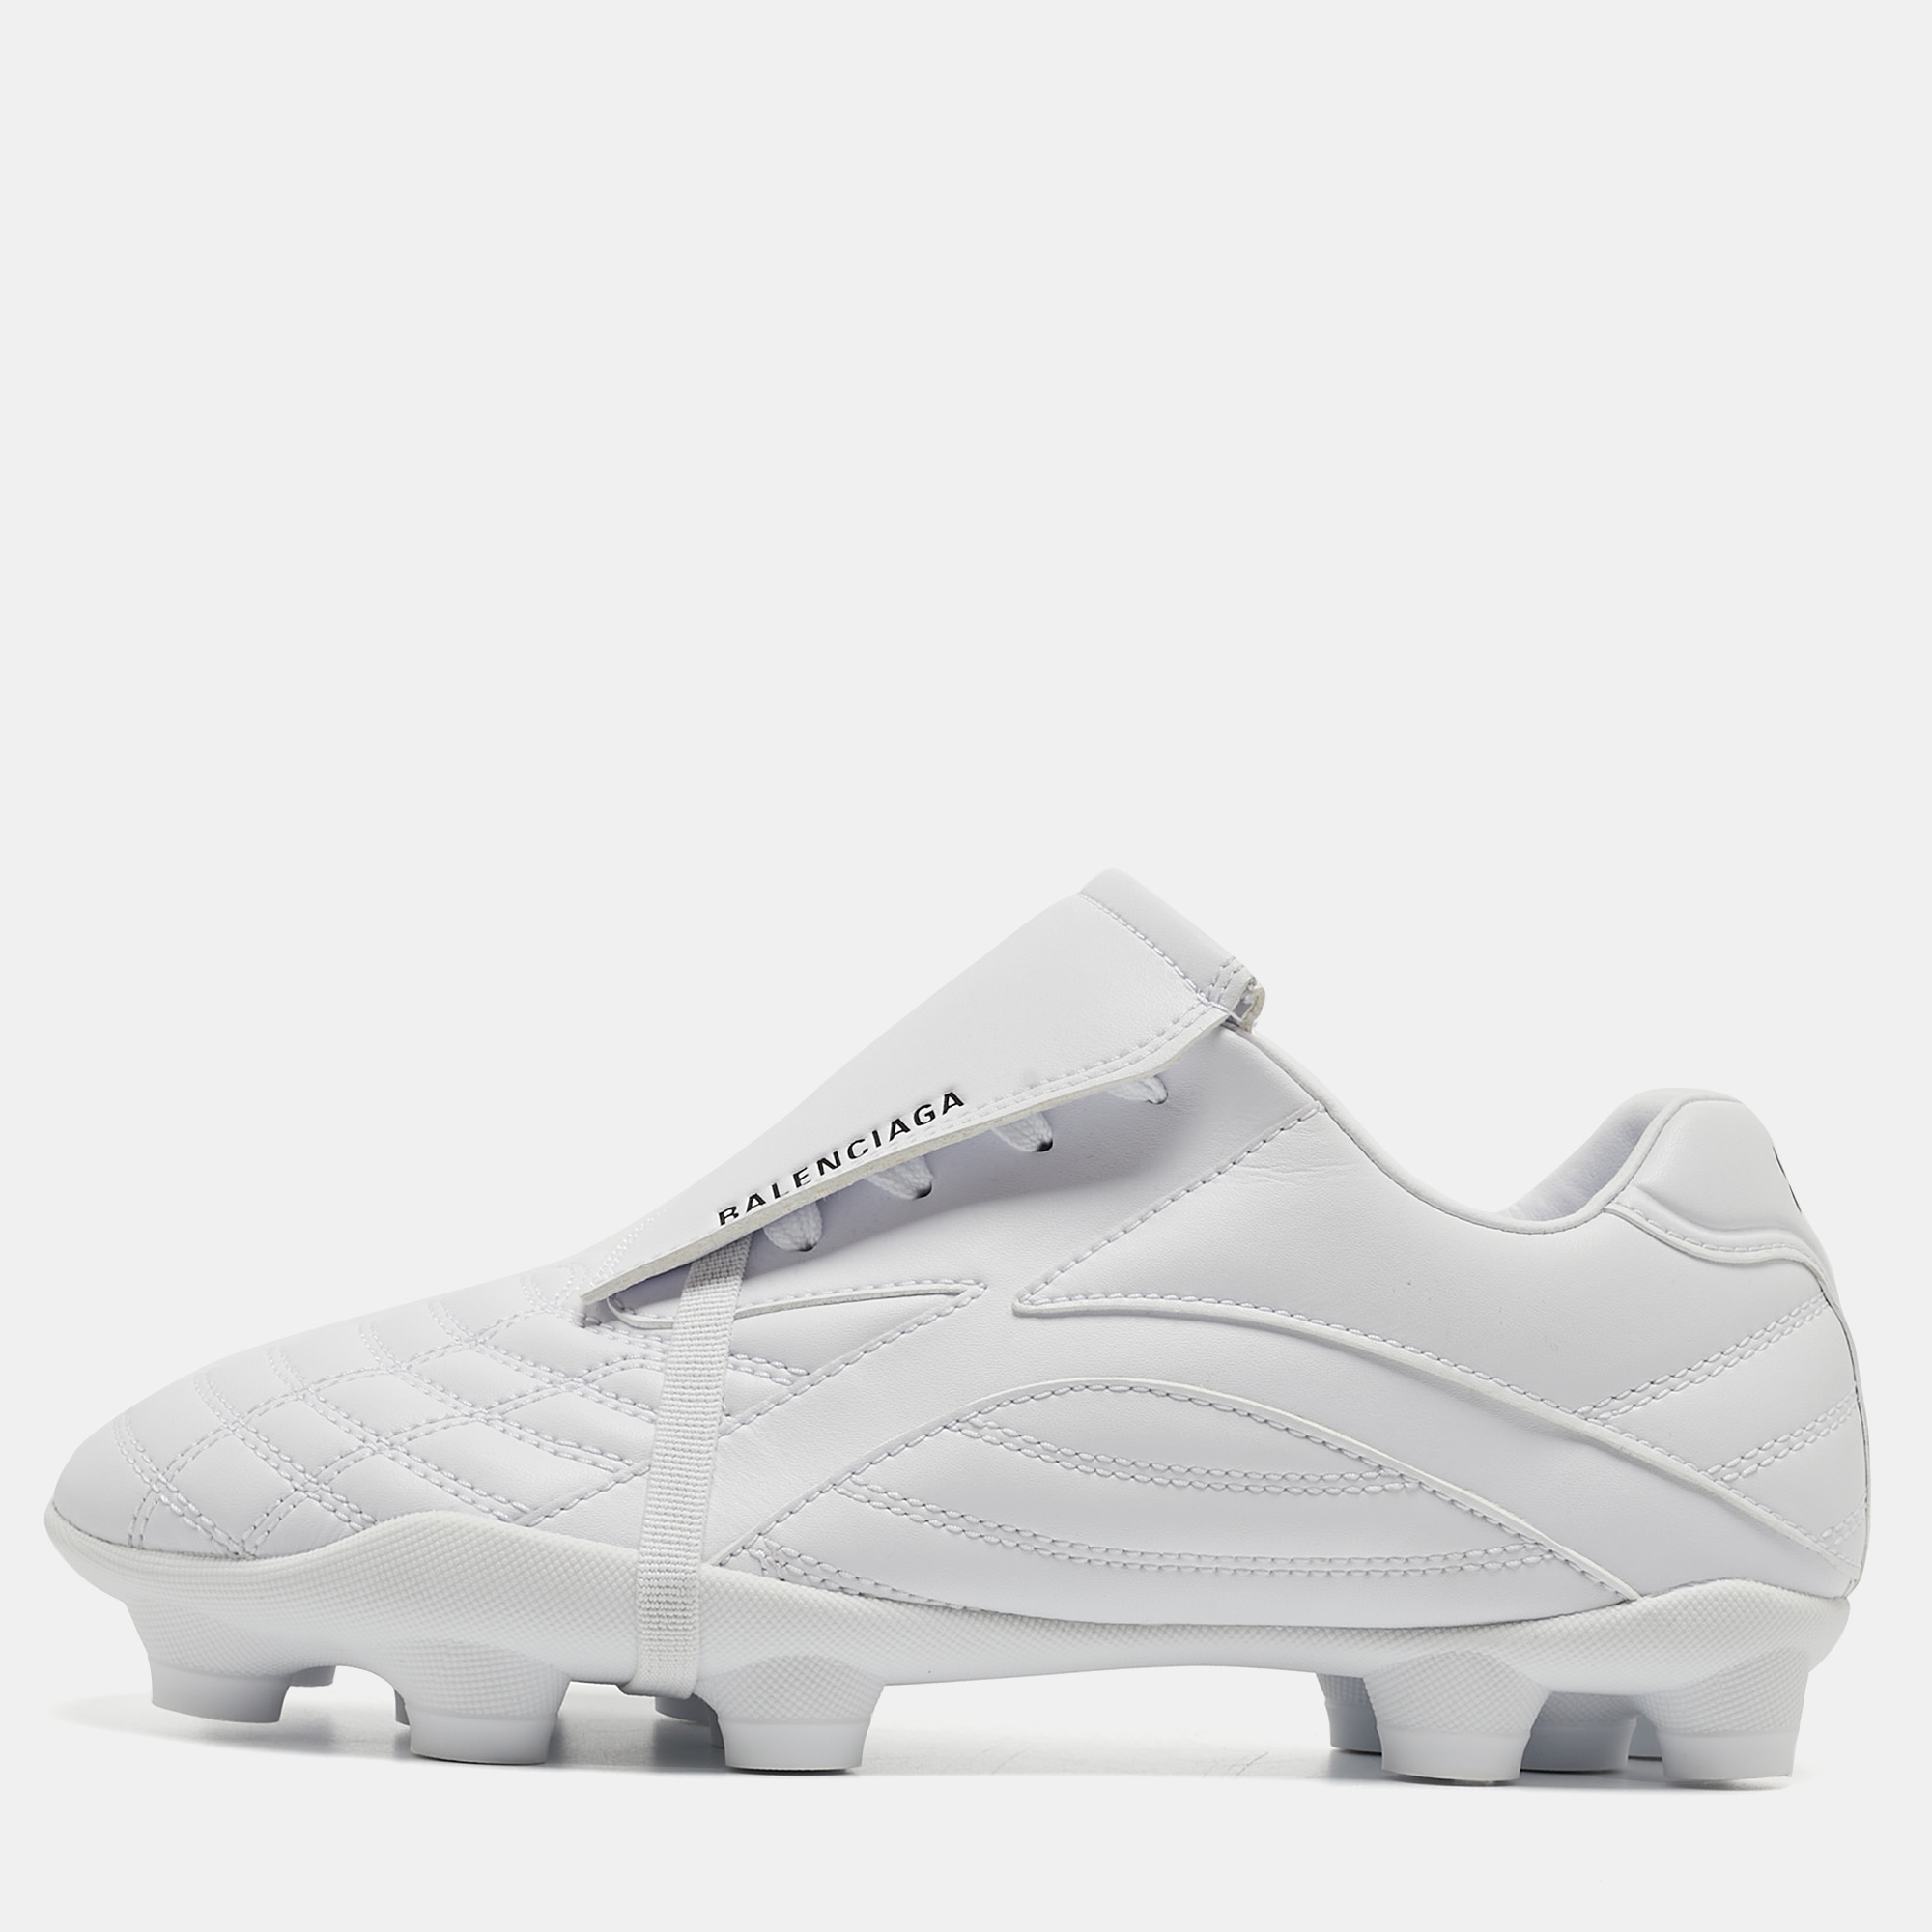 Elevate your casual attire with Balenciagas sneakers. Crafted with precision from high quality faux leather these sneakers exude contemporary charm. The clean white hue adds versatility while the soccer inspired design offers a sporty edge. Effortlessly stylish they blend comfort with urban sophistication.